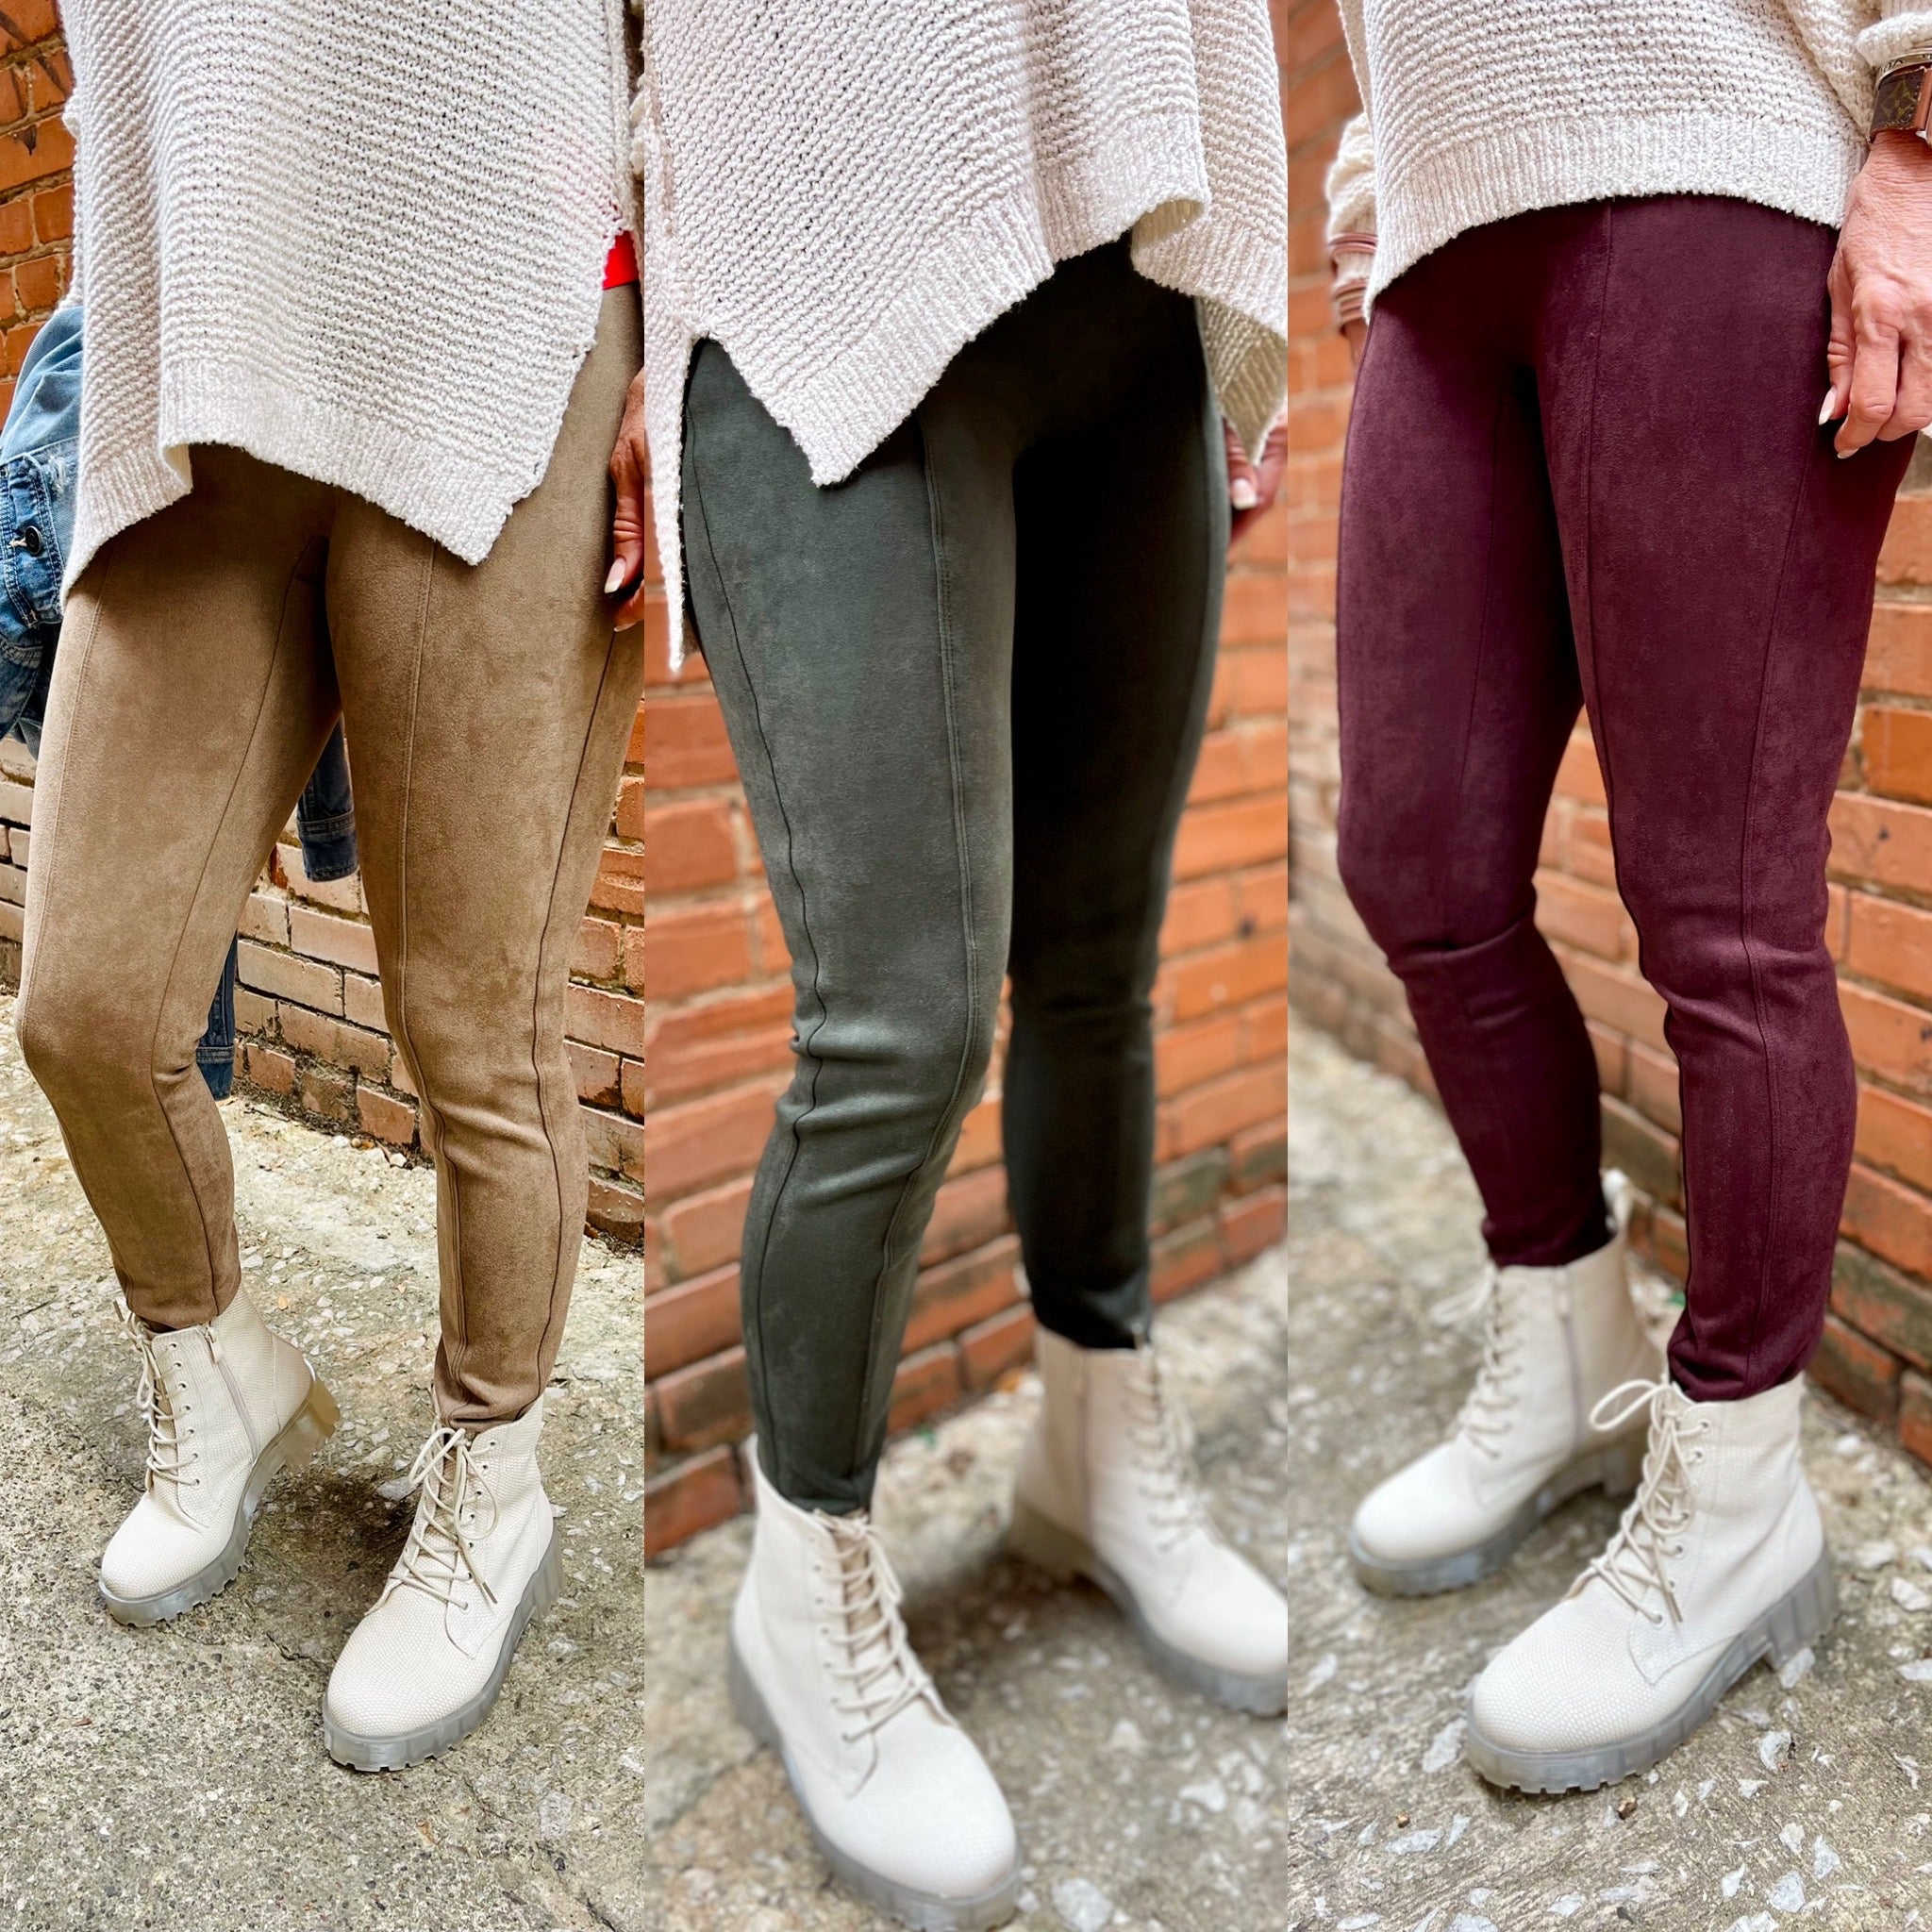 Silks Hosiery on X: Today's go-to? Our Faux Suede leggings